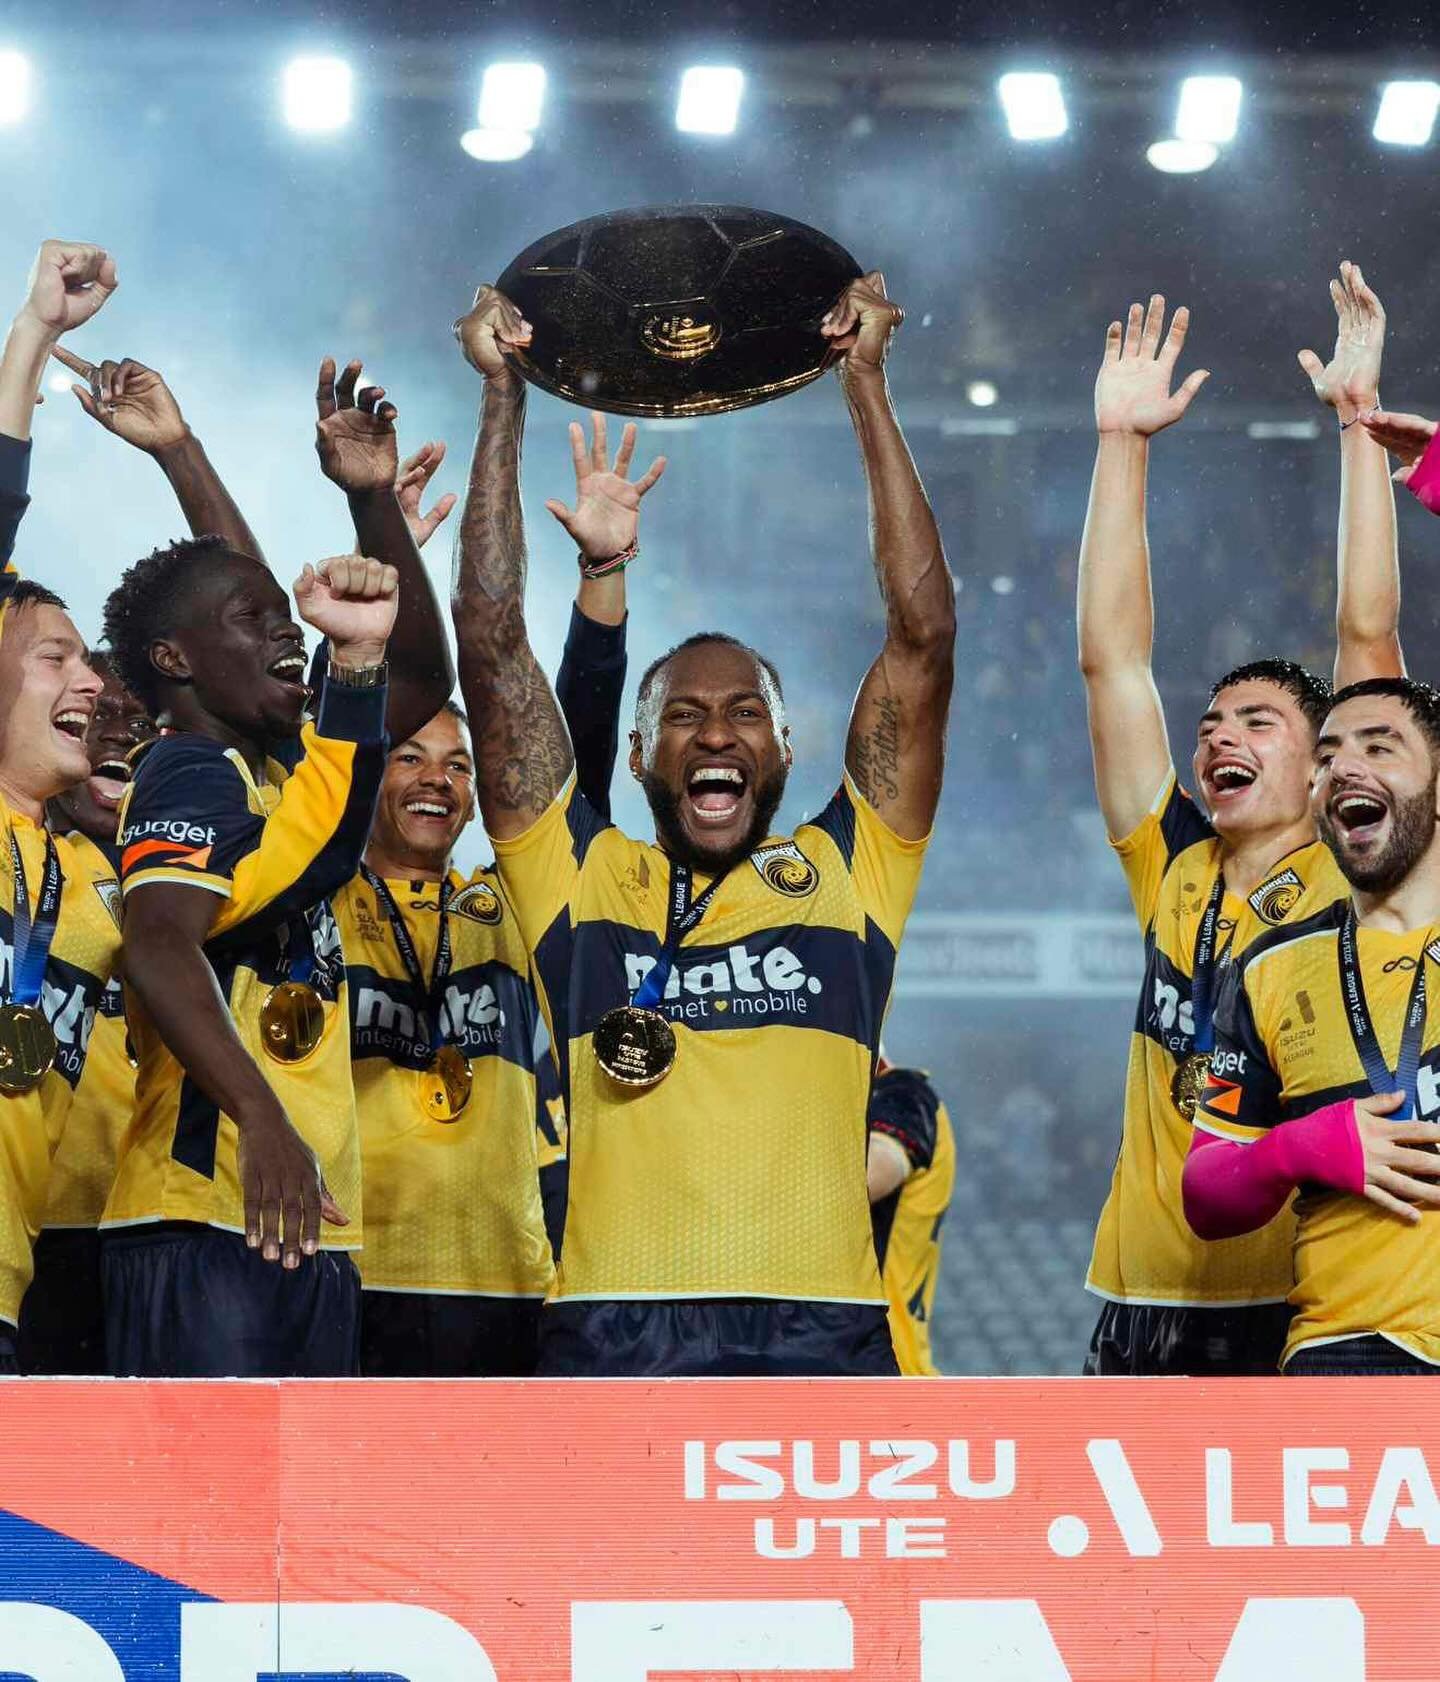 Congratulations to Brian Kaltak &amp; PPP Athlete on securing his second trophy in 2 years with the @ccmariners 🏆🏆🌴🌴🇻🇺🇻🇺

None of this would be possible without the support of @vanuatufootballfederation @brainplayathletemanagement @nick_montg